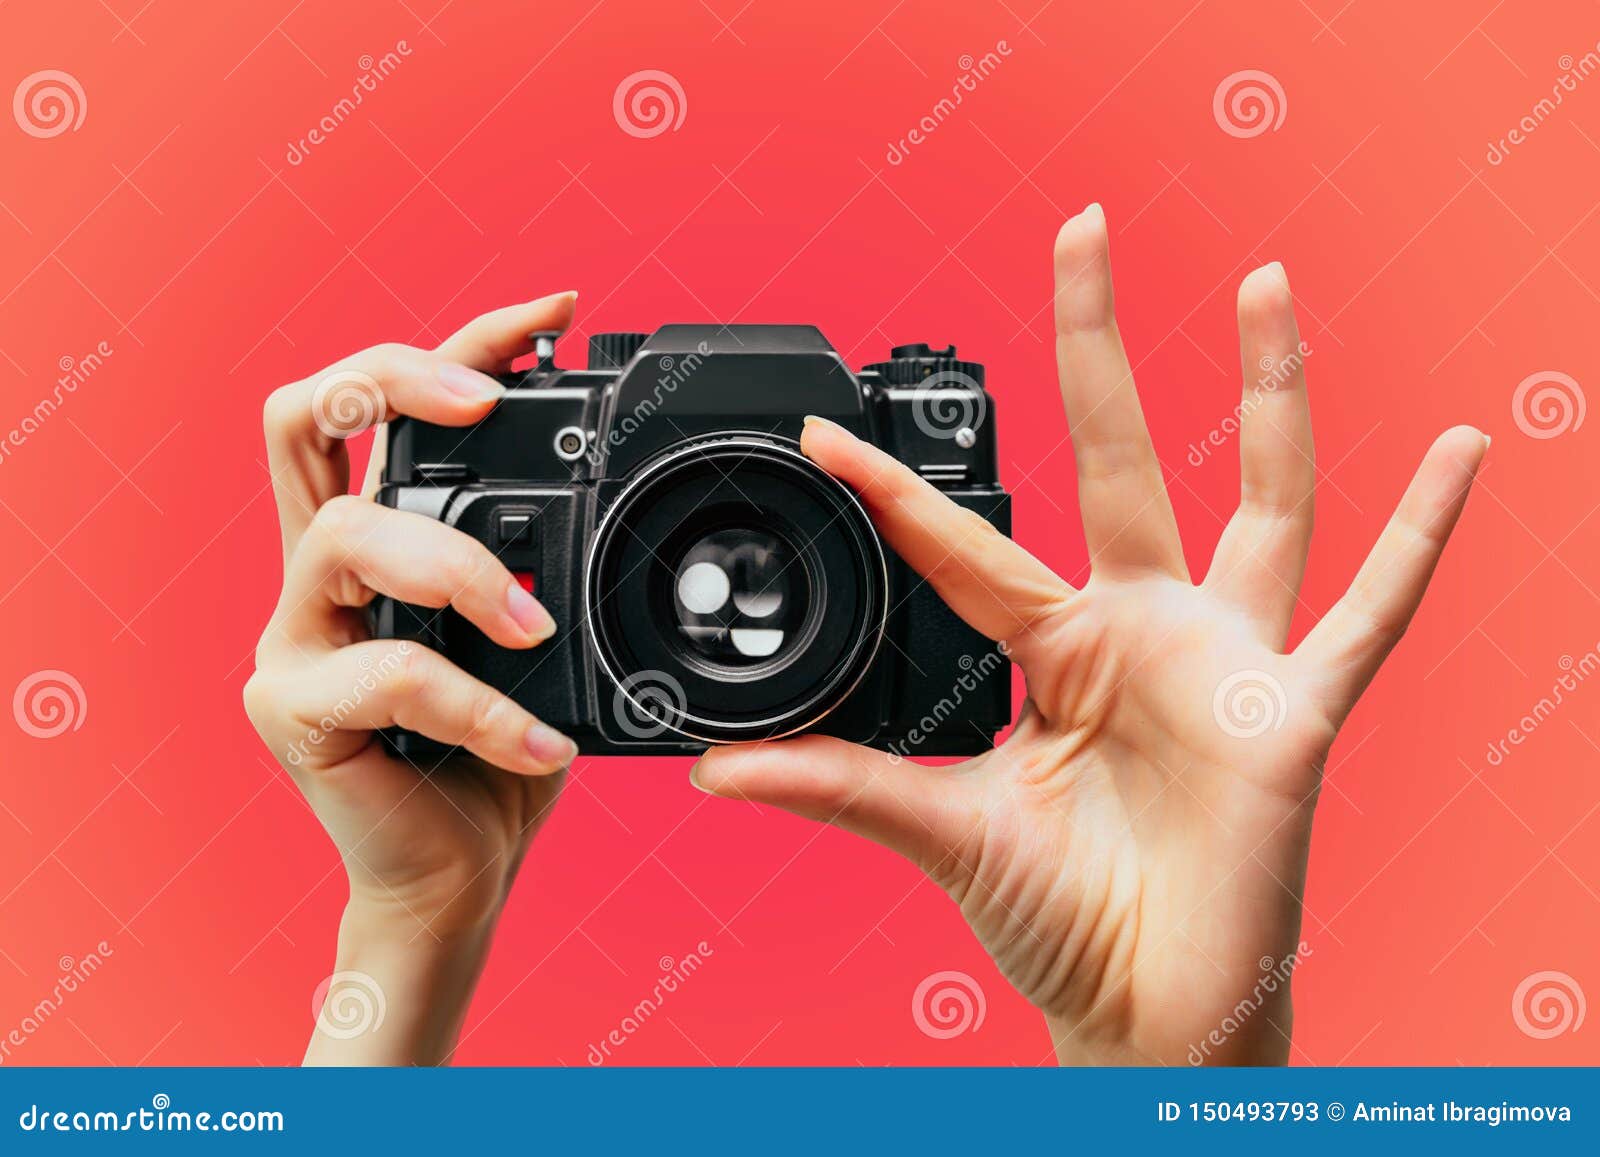 Vintage Camera in Female Hand. a Photo. Photographer. Manual Focus ...